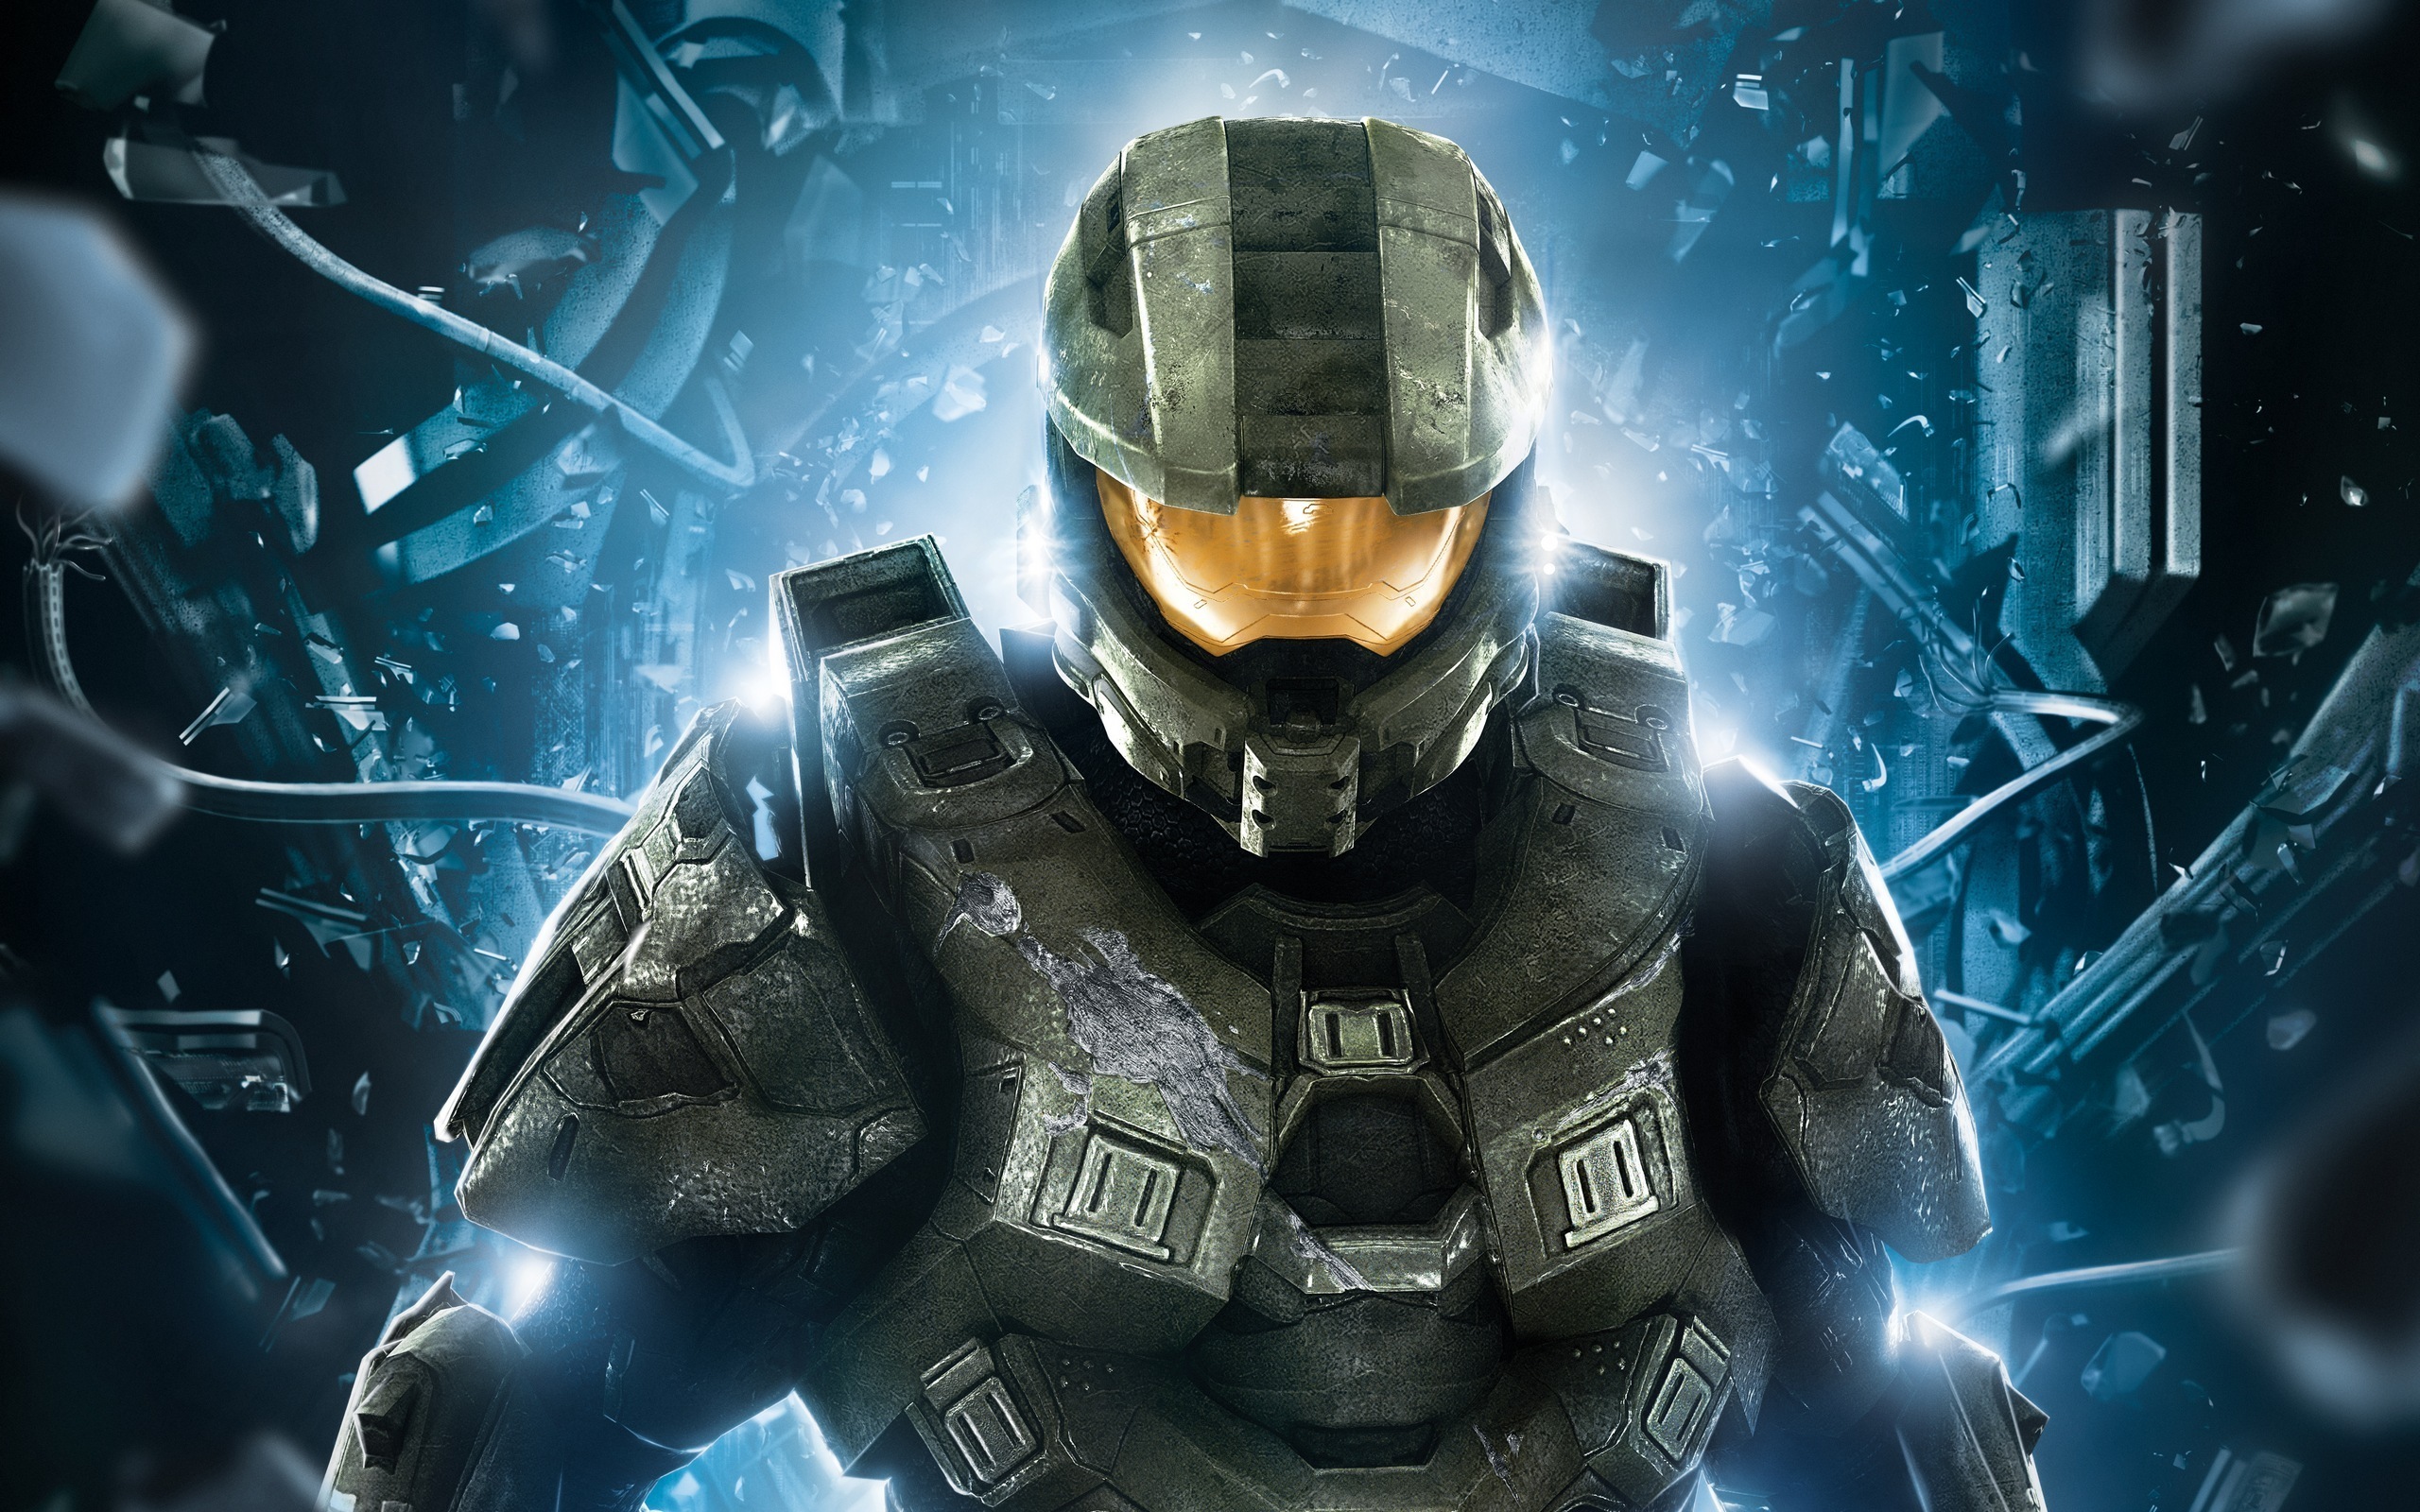 Halo 4 Xbox Game Exclusive HD Wallpapers 2982